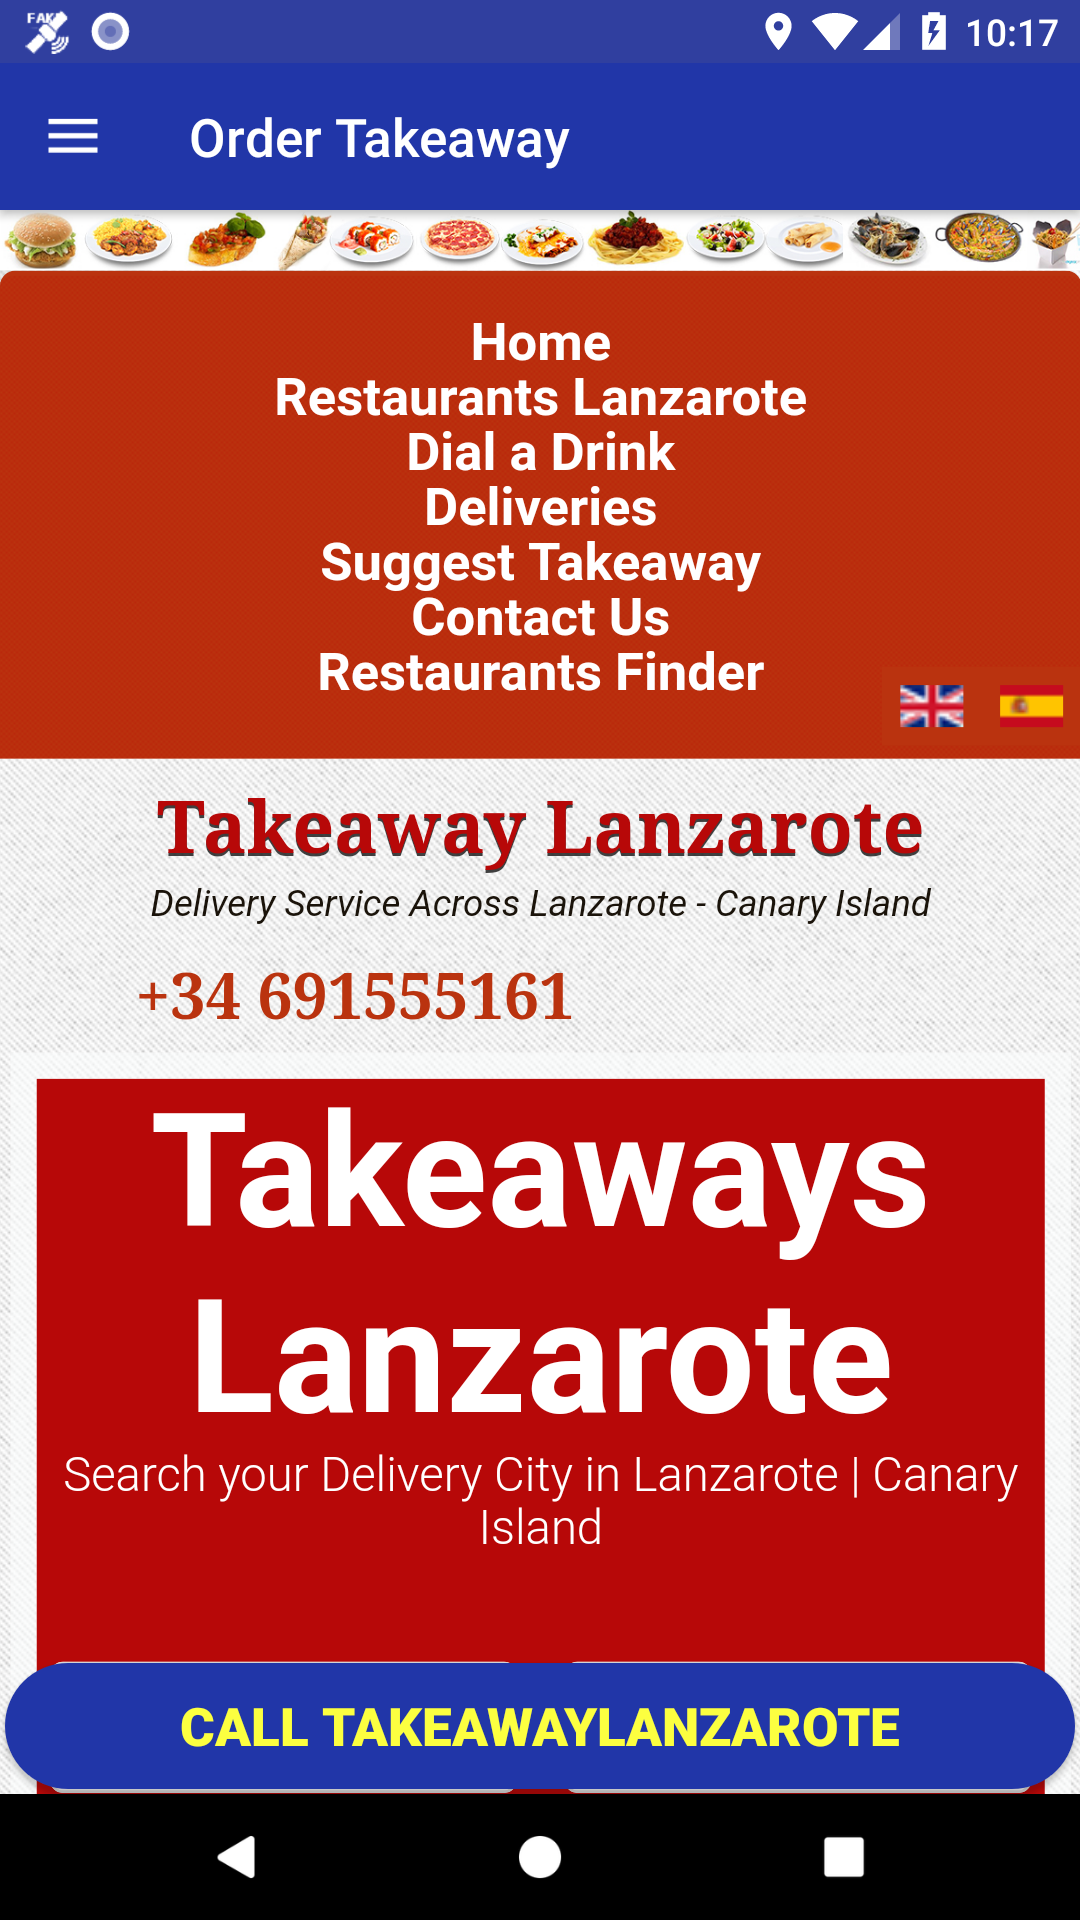 Order Food Airport Transport San Bartolome Lanzarote - Private Drivers San Bartolome Lanzarote - Book a Taxi San Bartolome Lanzarote - Airport Transfers with Private Chauffeur Services - Arrecife Airport Transfers - Taxi Bookings San Bartolome Lanzarote - Airport Transfers Bookings San Bartolome Lanzarote - Professional Taxi - Private Taxi -Arrecife Airport Taxi - Book Taxi San Bartolome Lanzarote Your Local Expert for Airport Transfers - Taxi For Groups - Taxi For Private Events - Taxi Rentals - Taxi For Airports